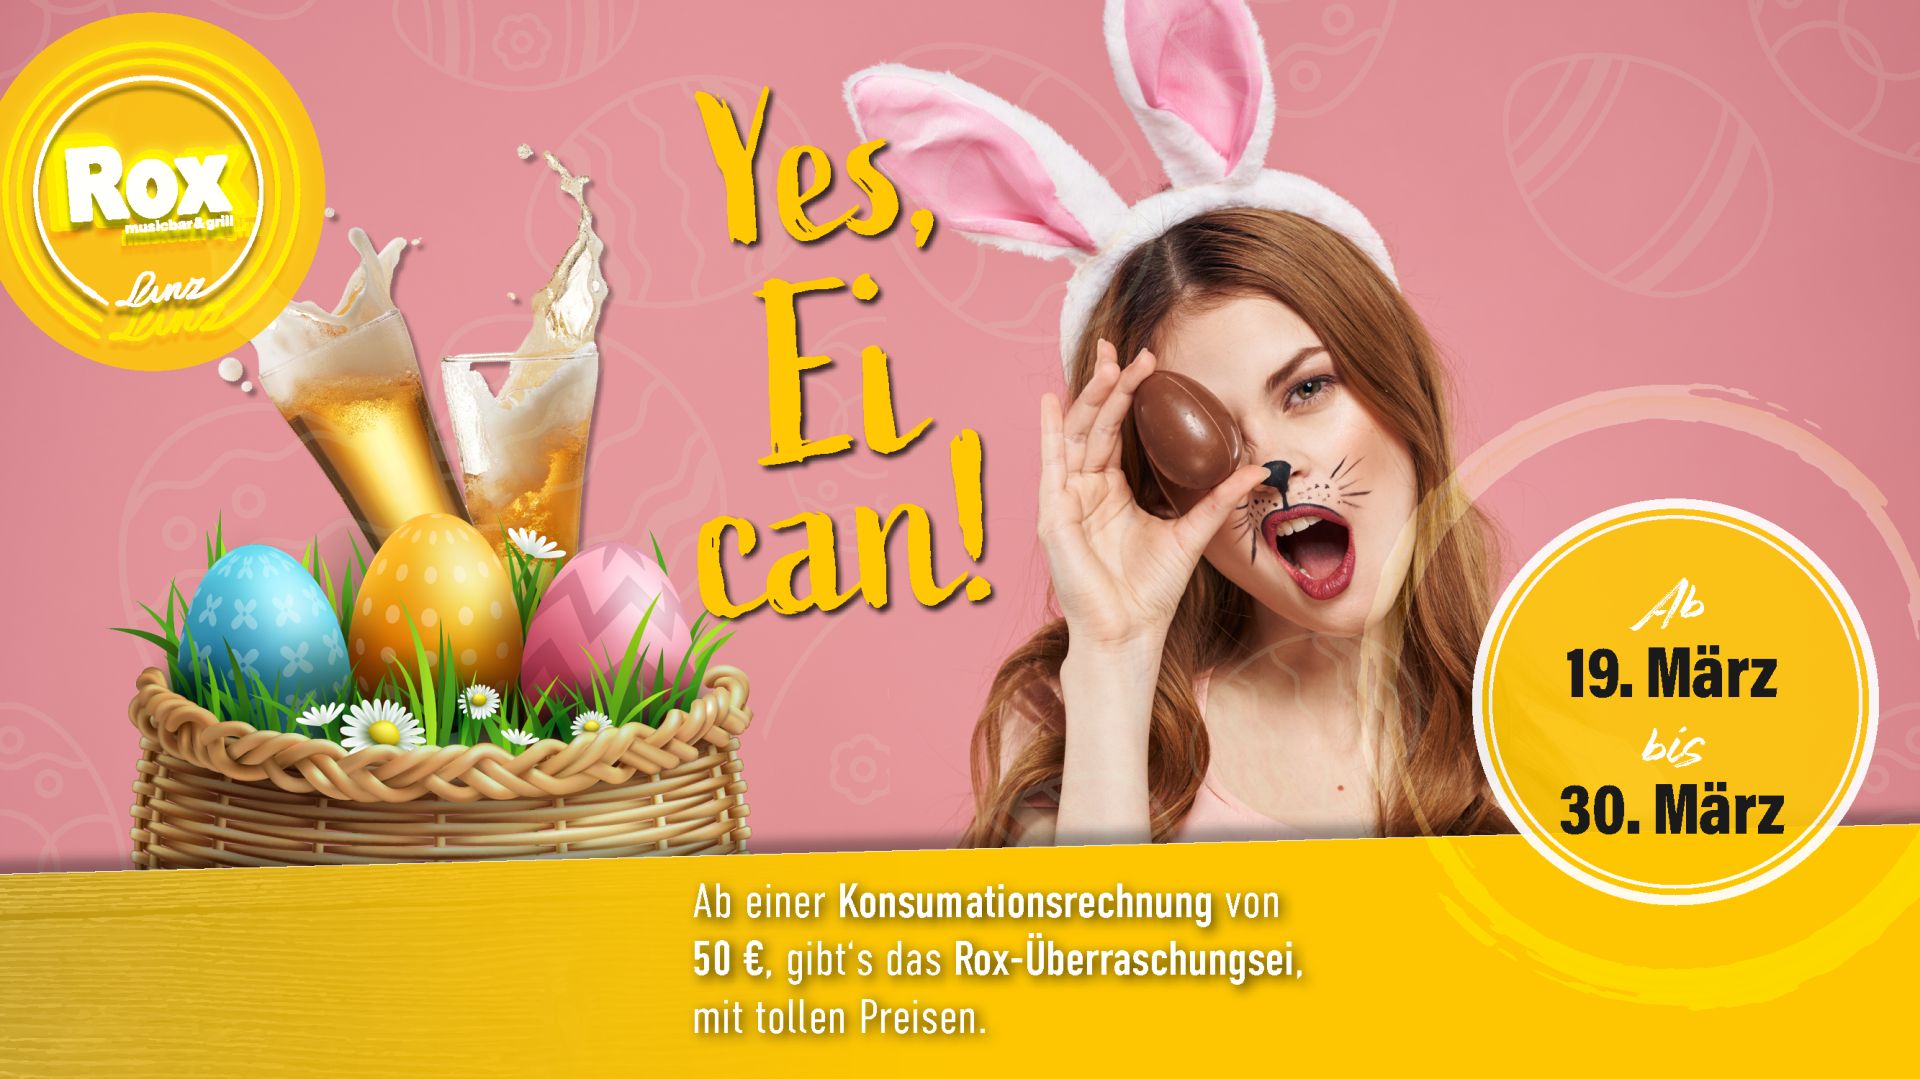 Yes, EI can! | 19.03. - 30.03.